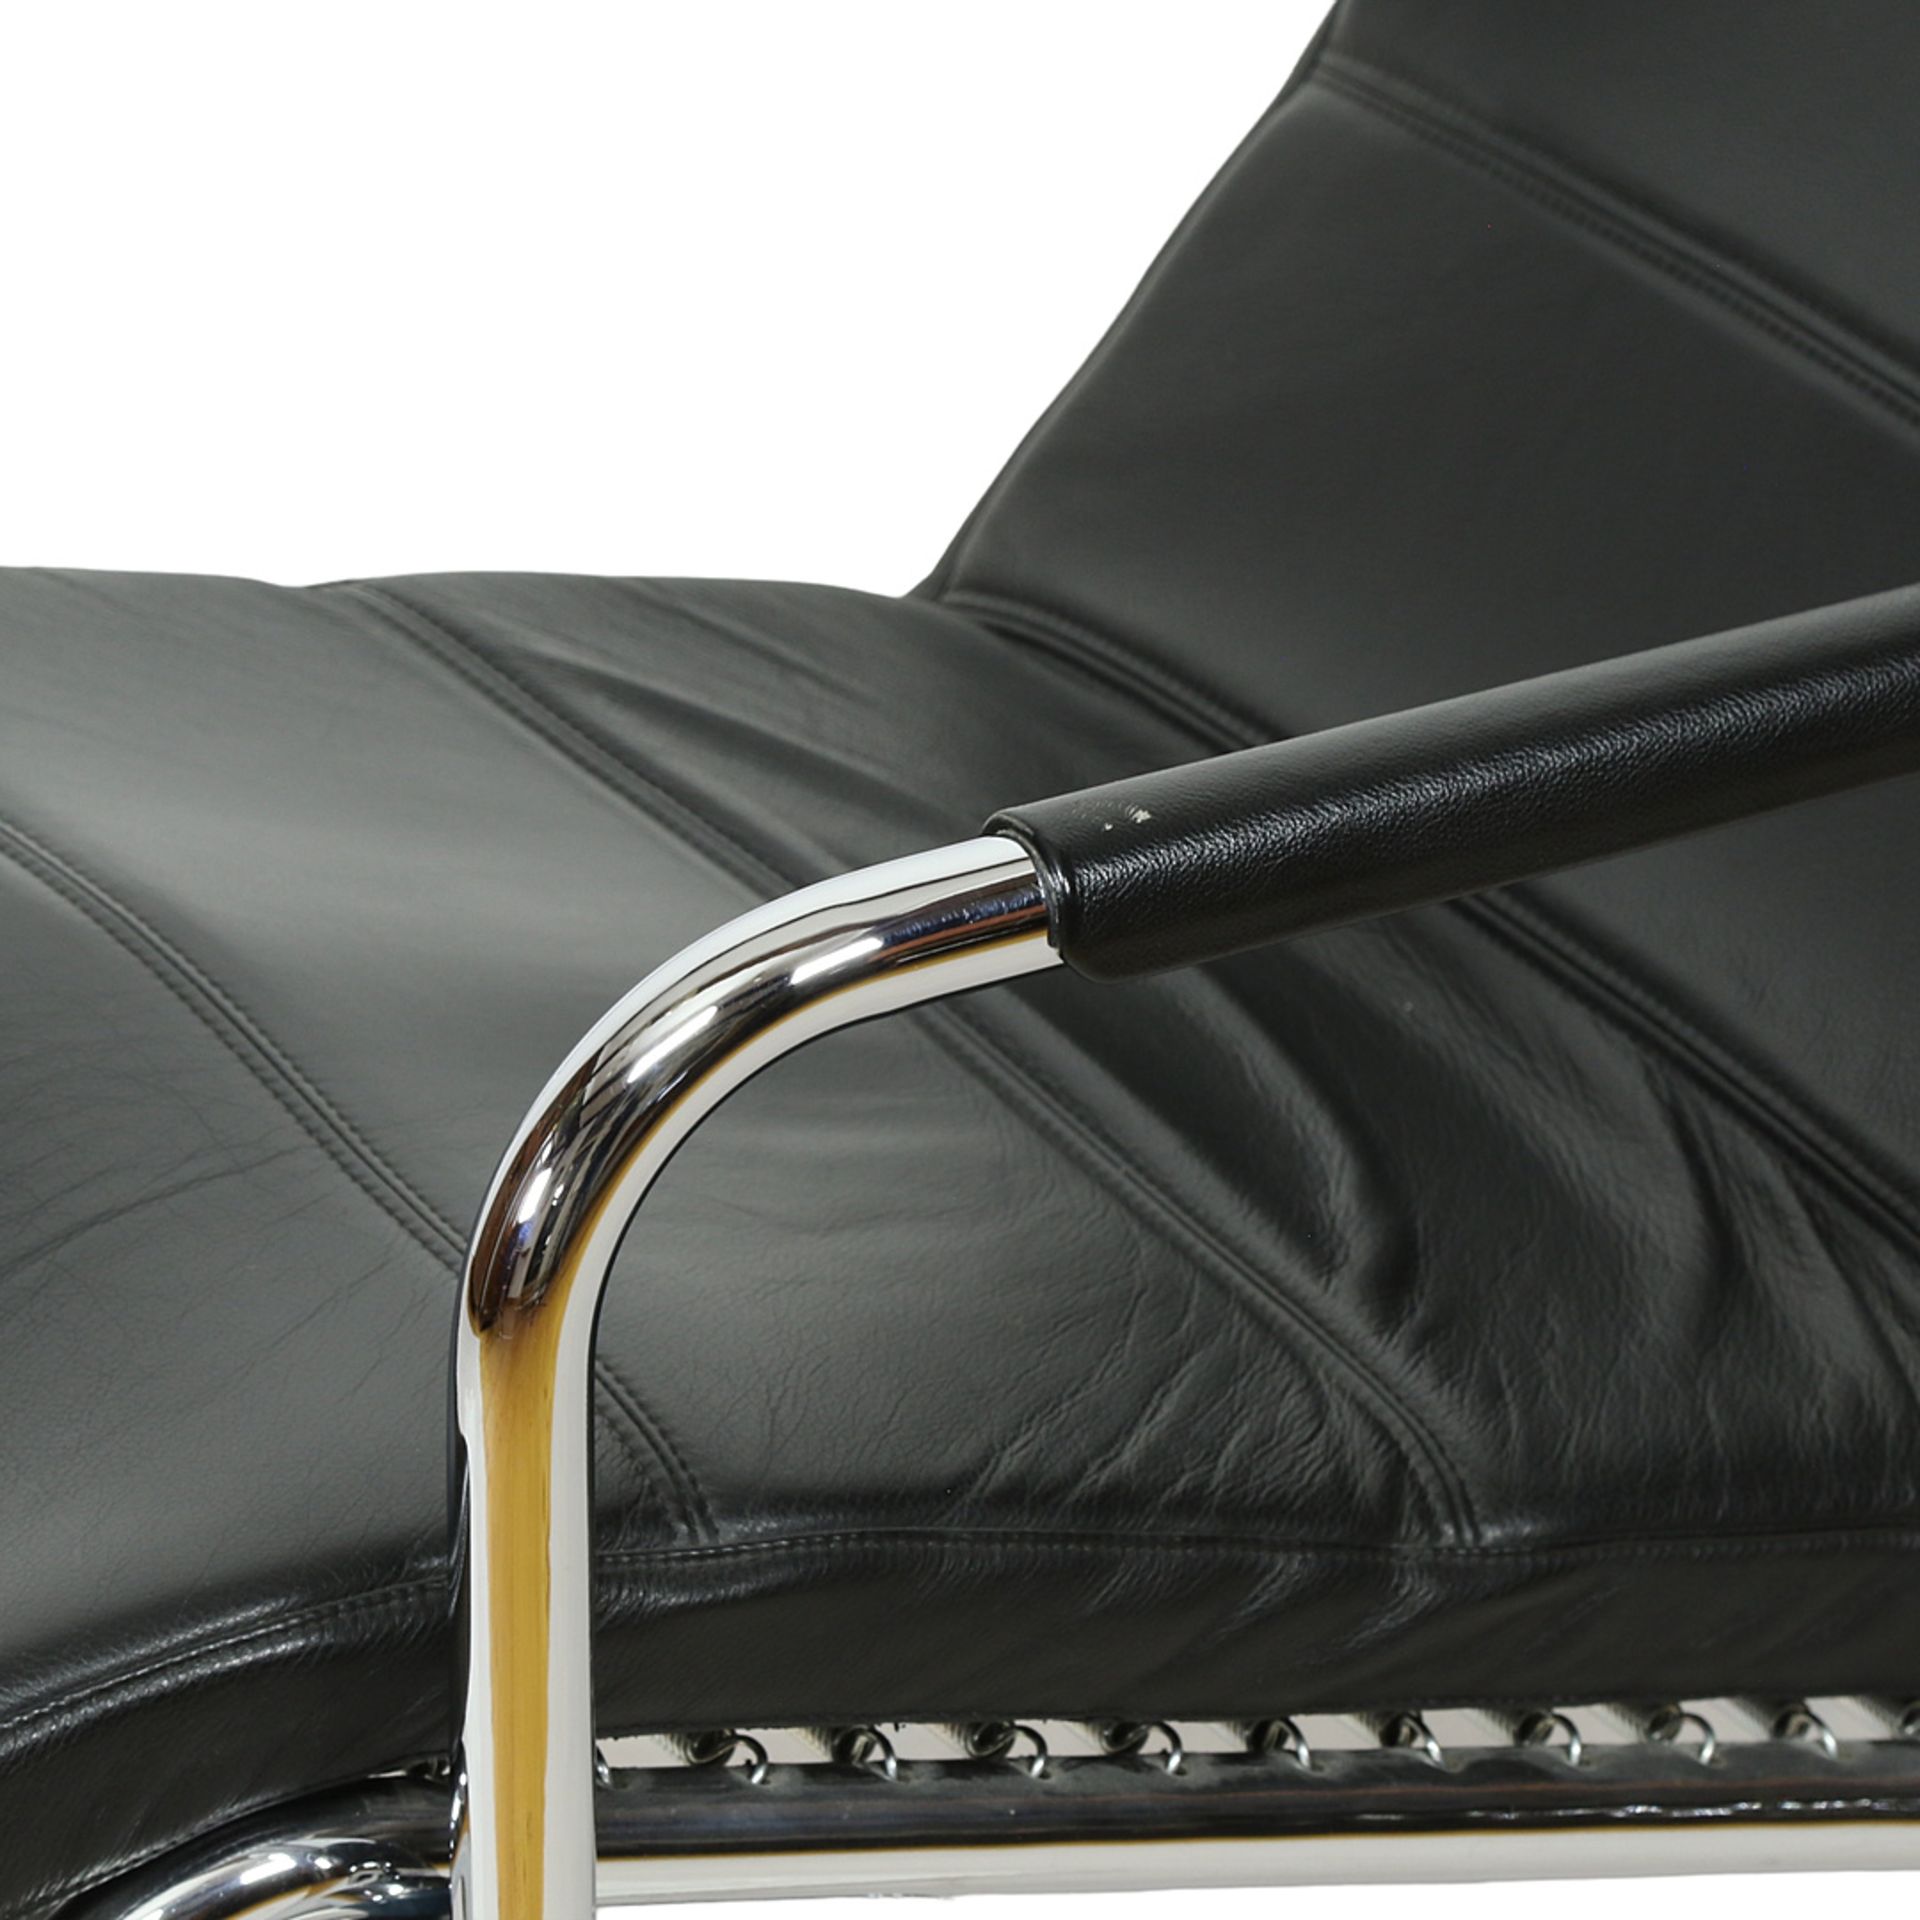 Chaise longue with stool, chrome-plated steel, black leather cover - Image 6 of 9